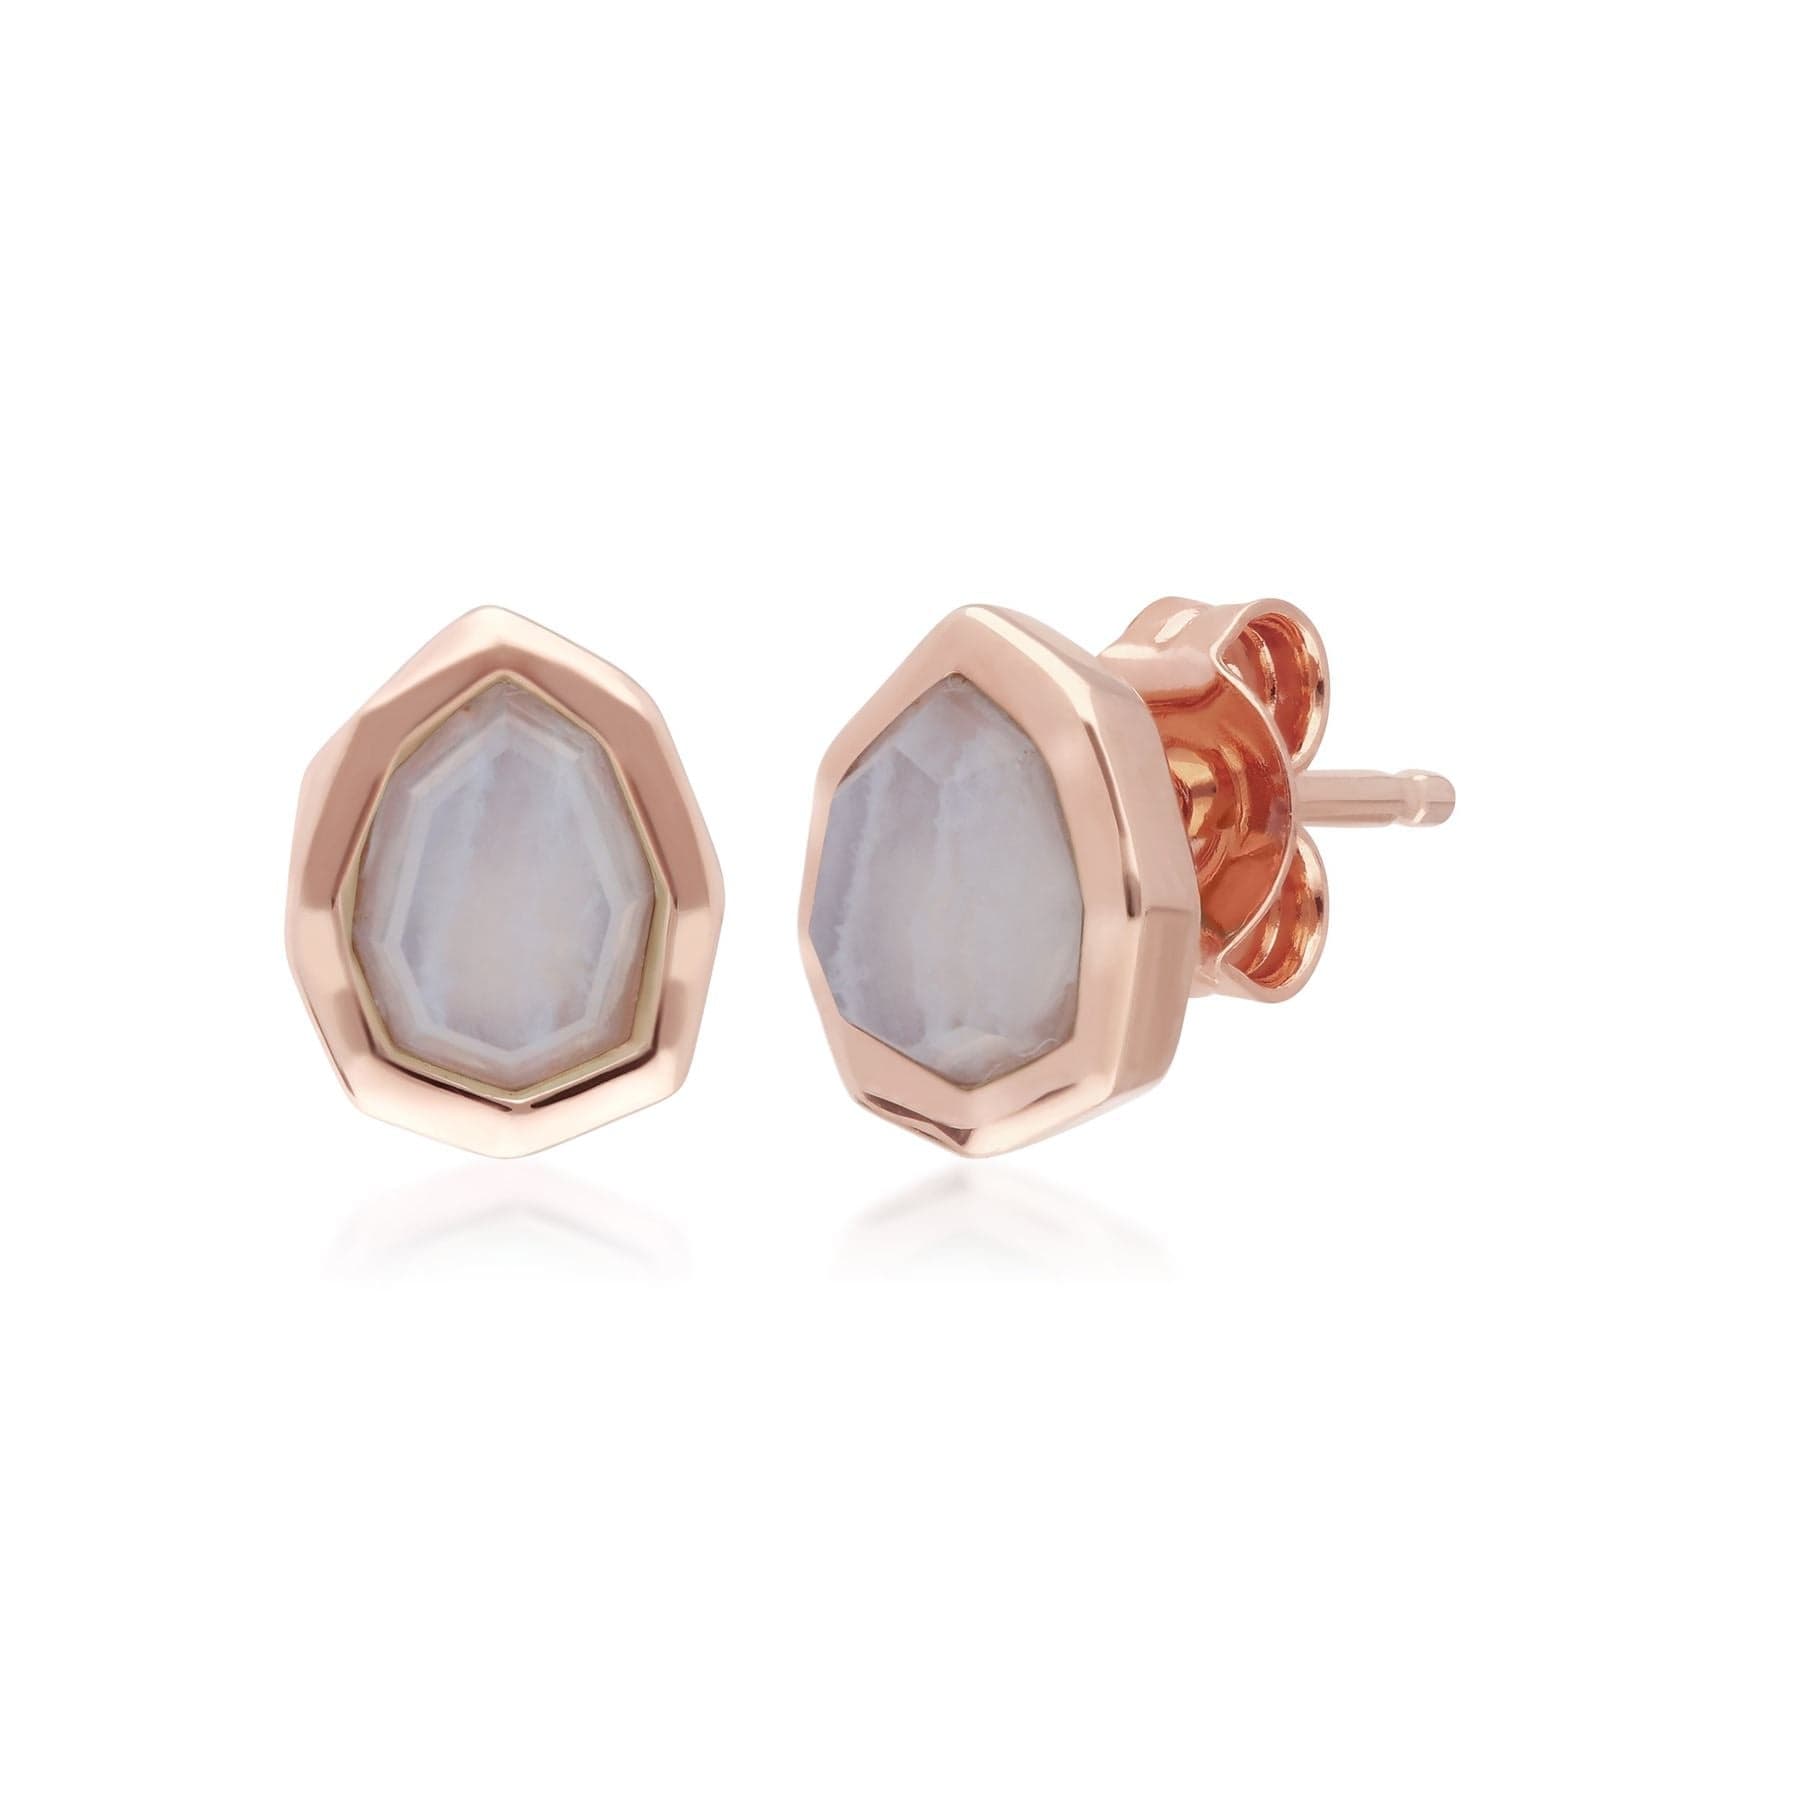 271E021201925 Irregular B Gem Blue Lace Agate Stud Earrings in Rose Gold Plated Silver 1